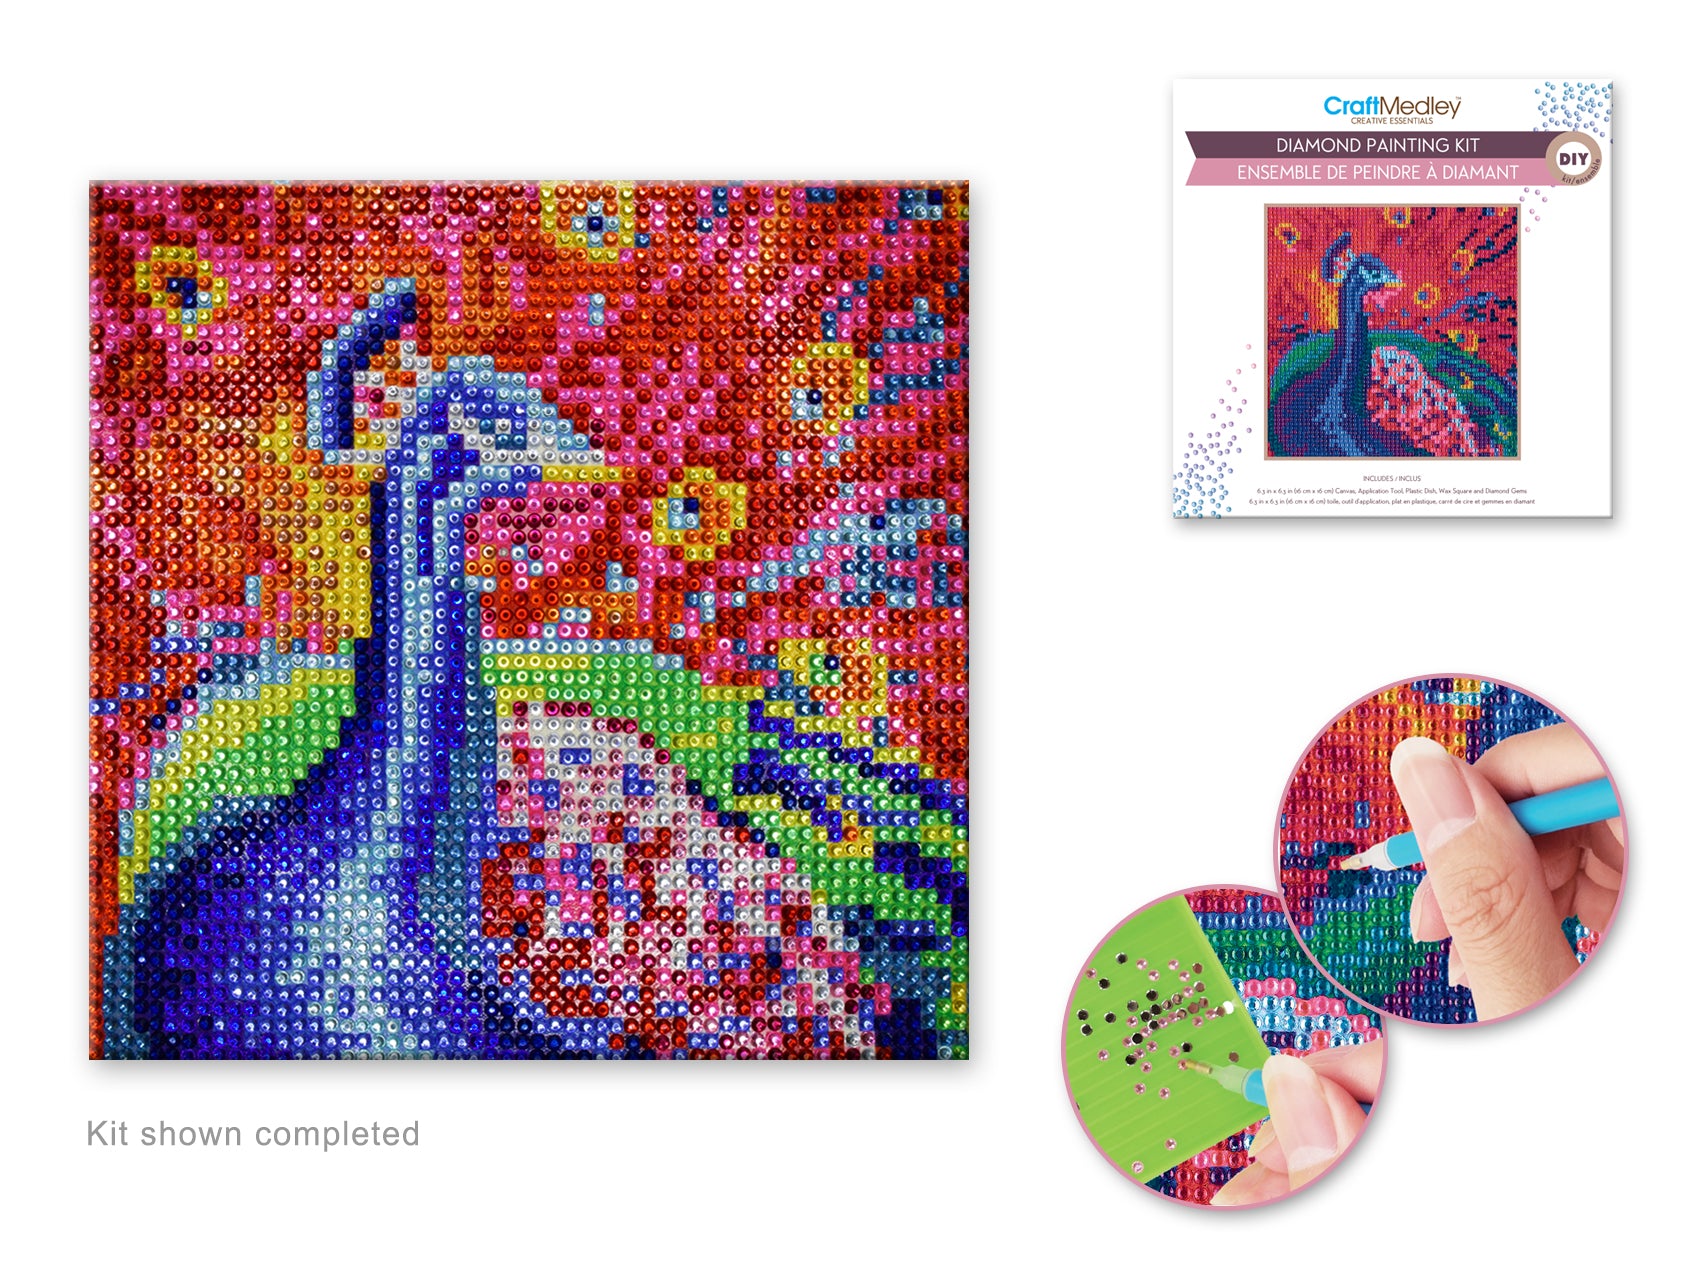 Diamond painting kit. This design features a colorful peacock.